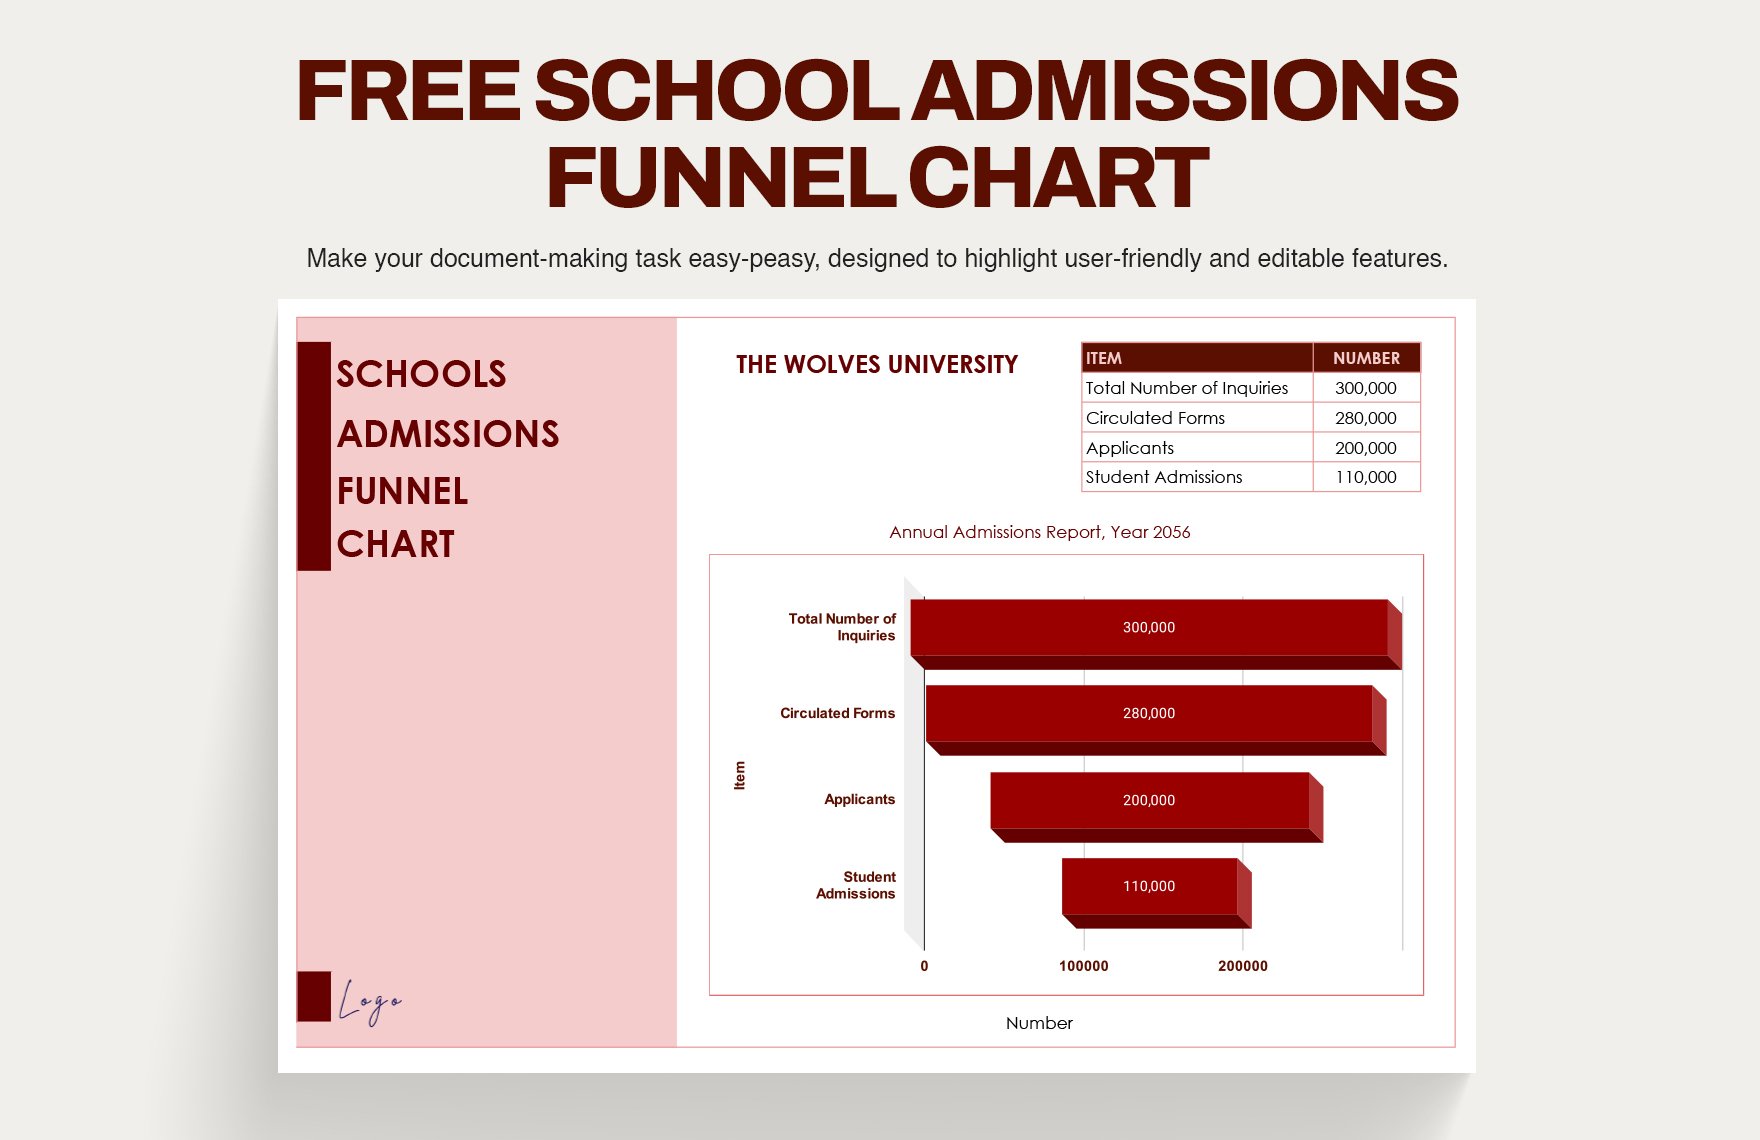 Free School Admissions Funnel Chart